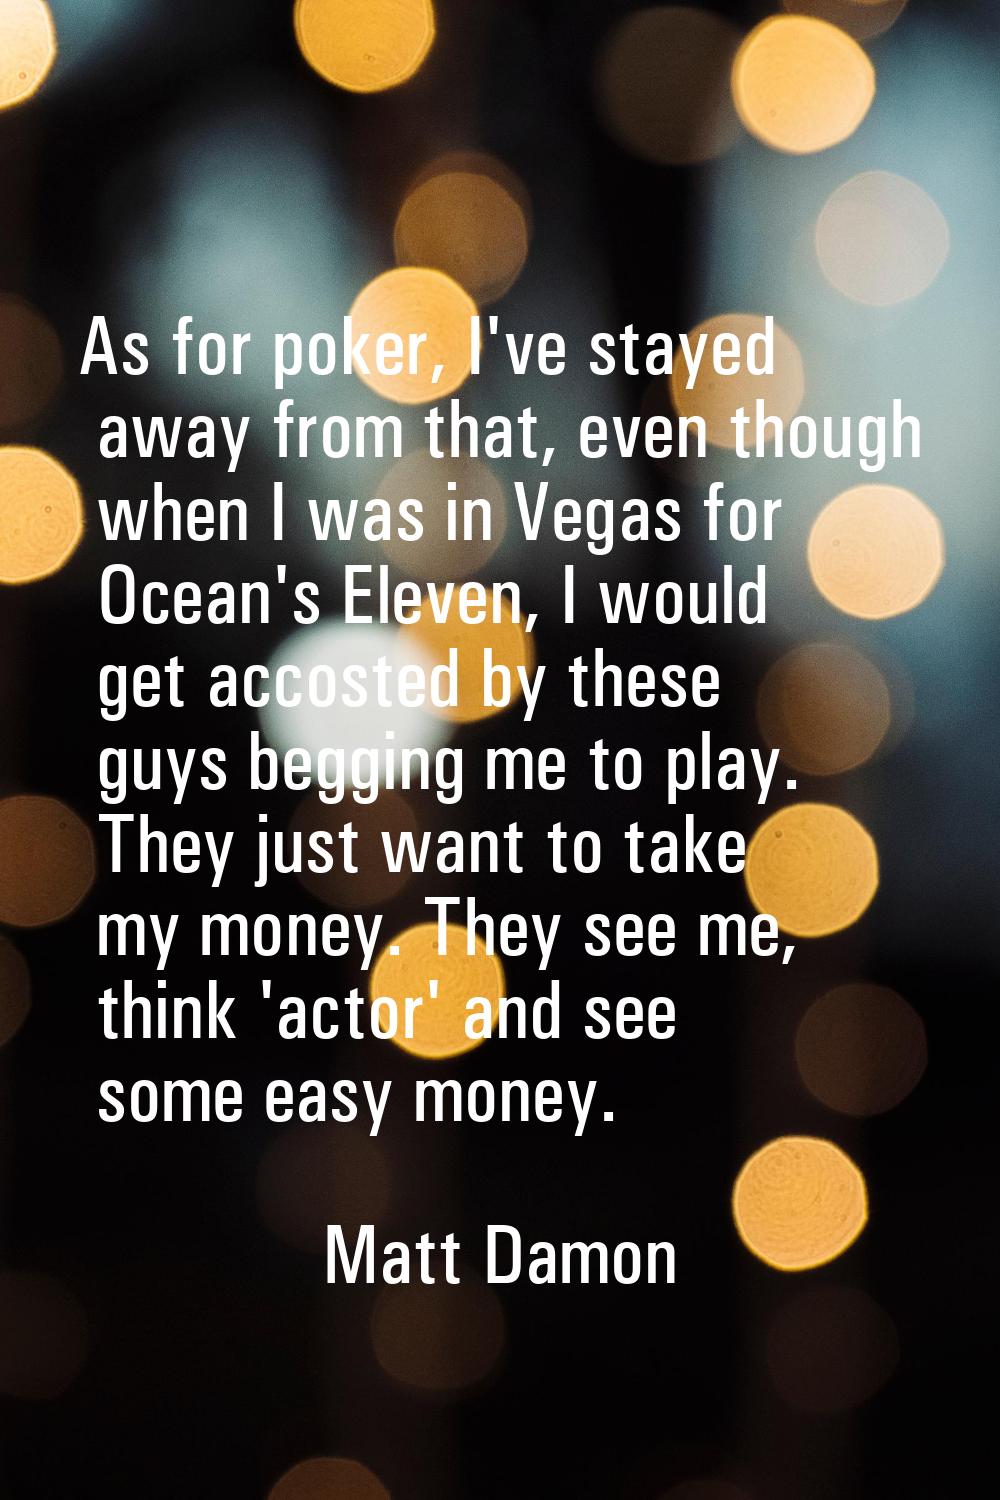 As for poker, I've stayed away from that, even though when I was in Vegas for Ocean's Eleven, I wou